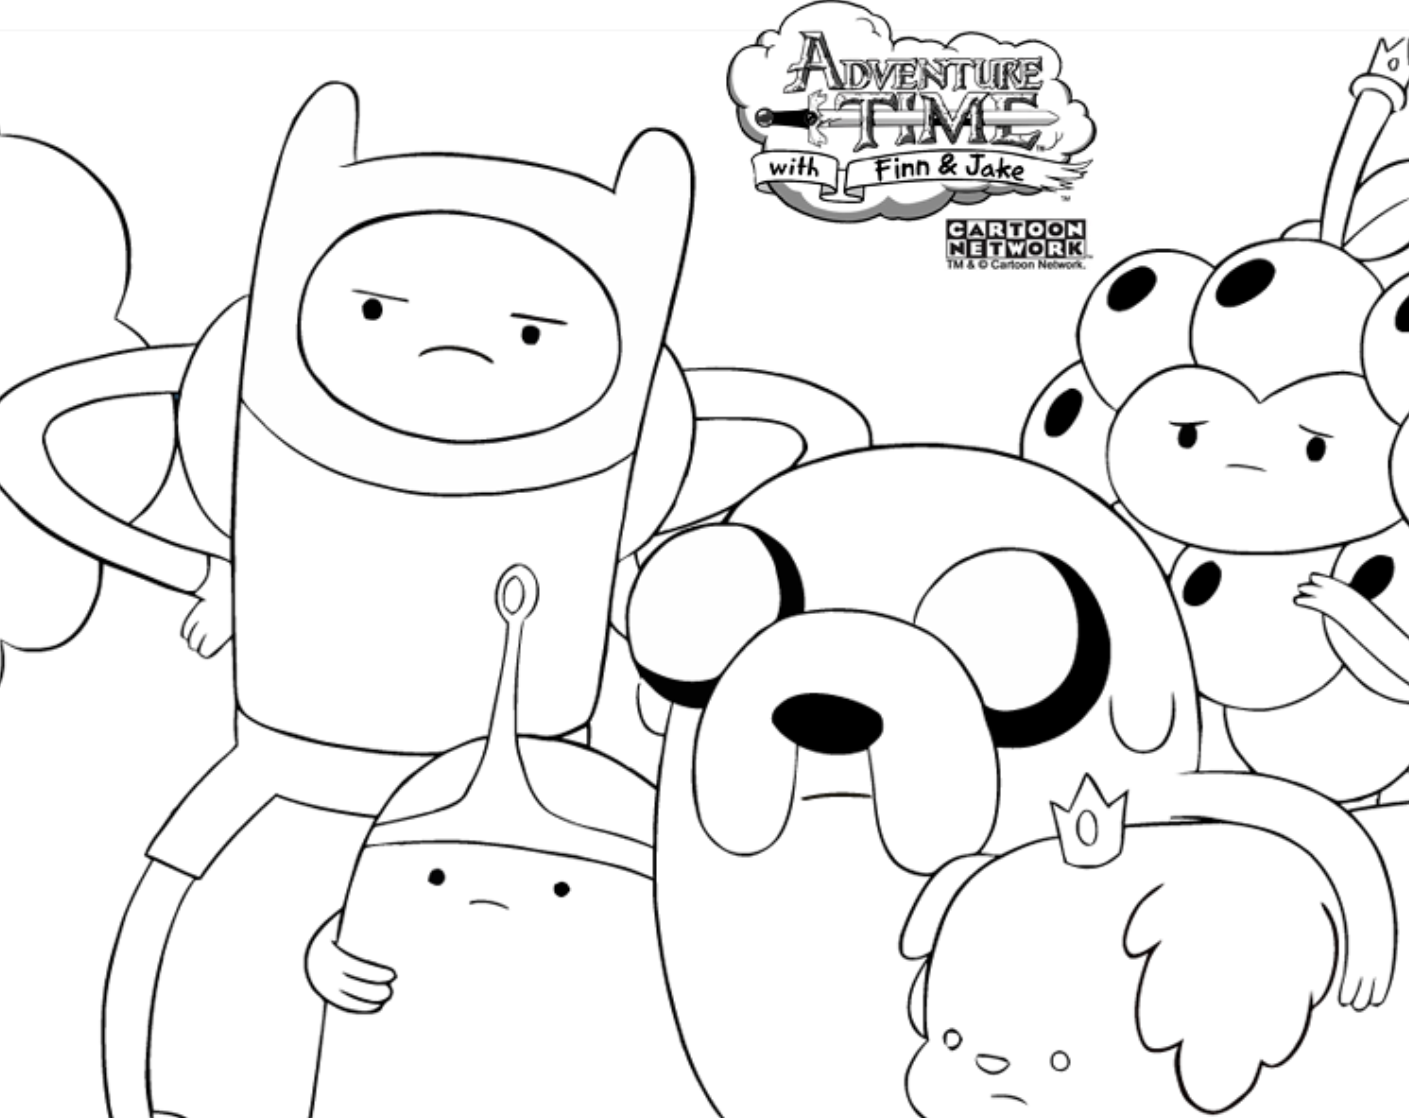 Adventure Time Coloring Pages | Cartoon Coloring pages of ...